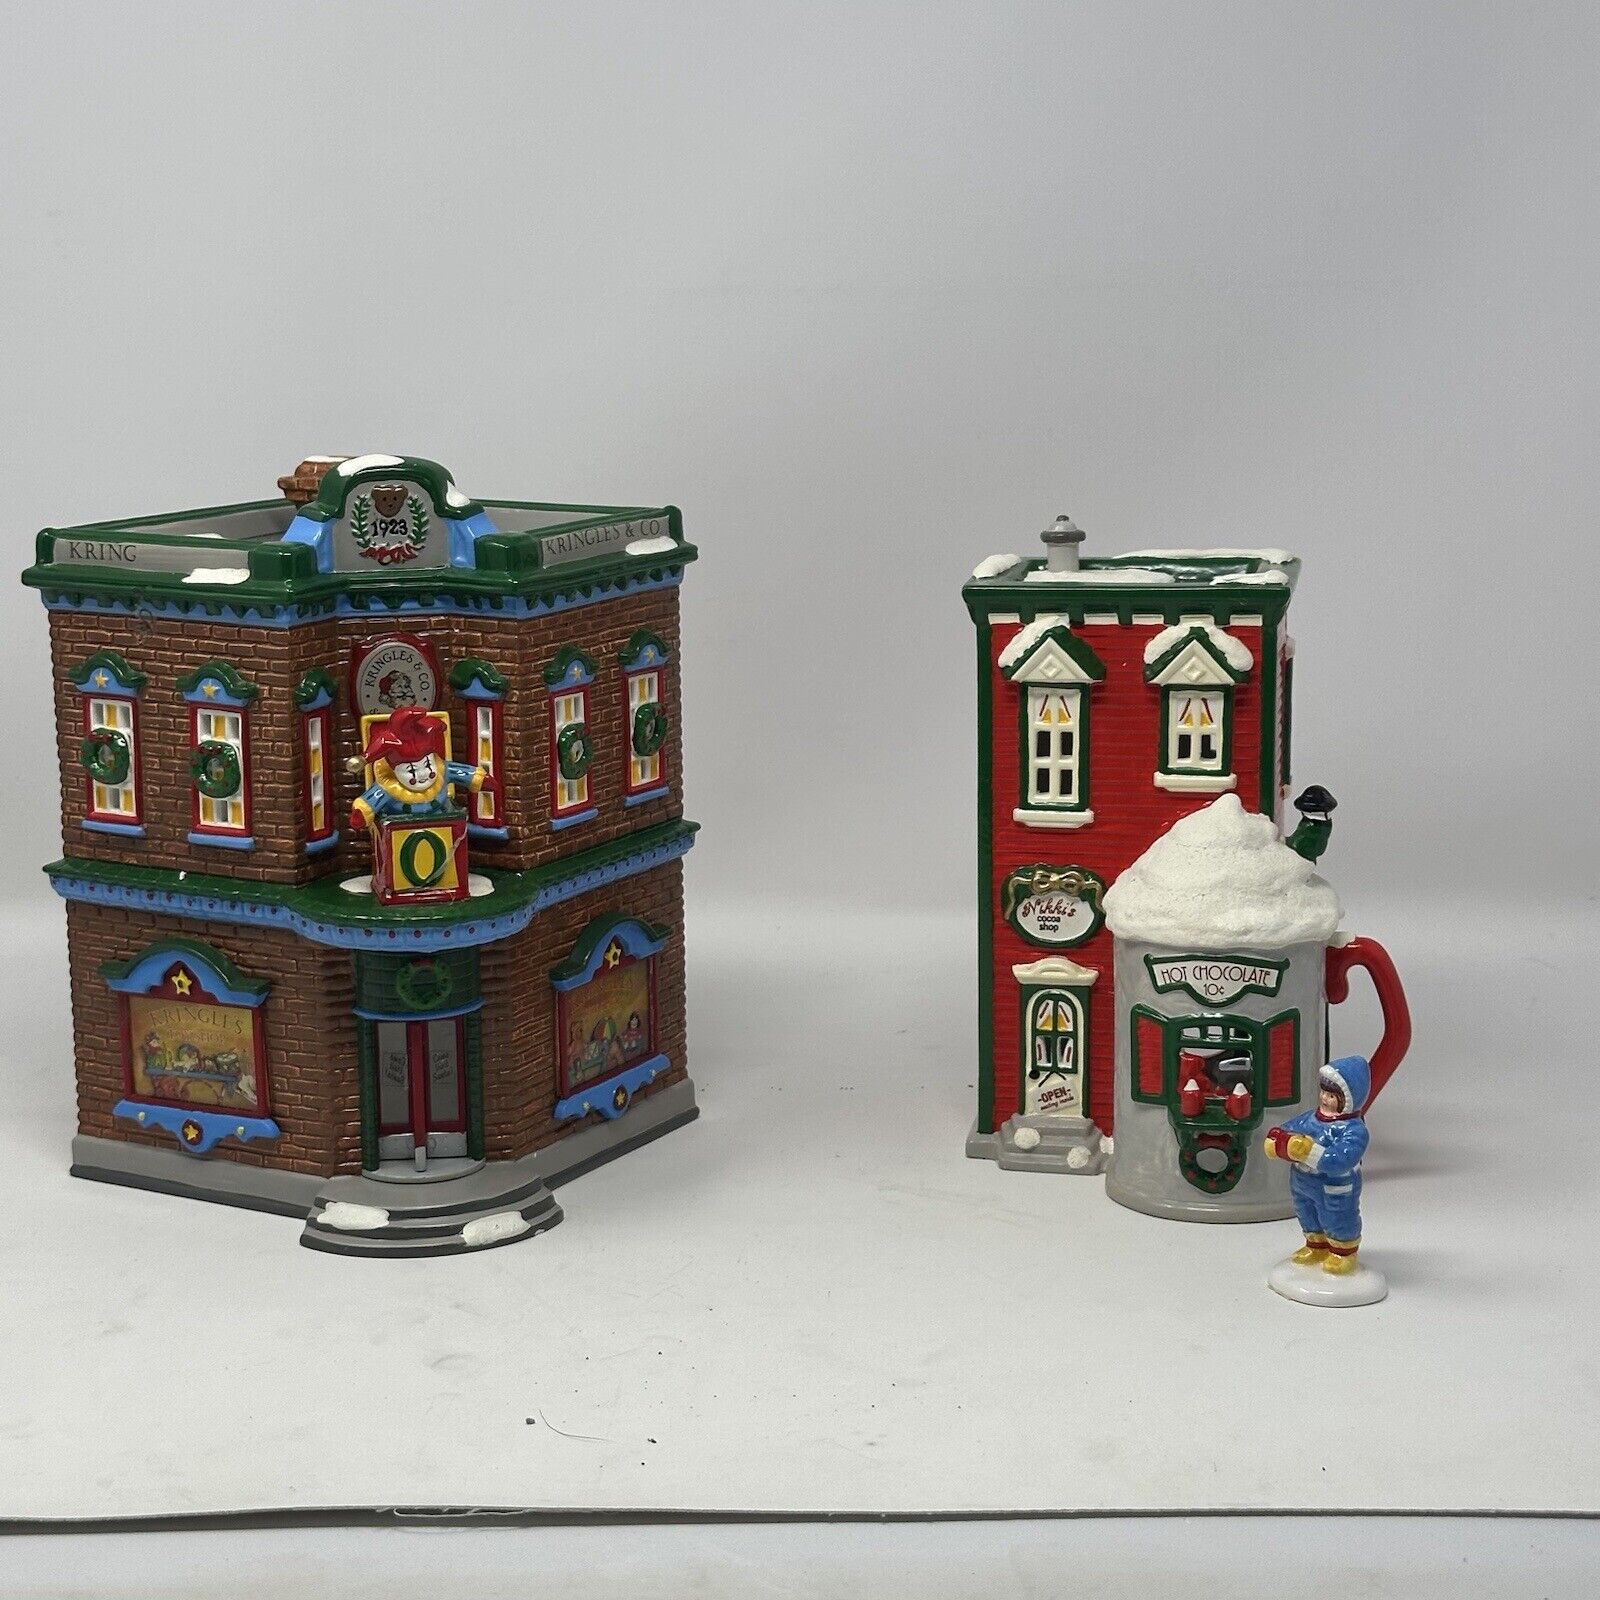 1997 Dept 56 Snow Village Saturday Morning Downtown 54902 Vintage - Not Complete